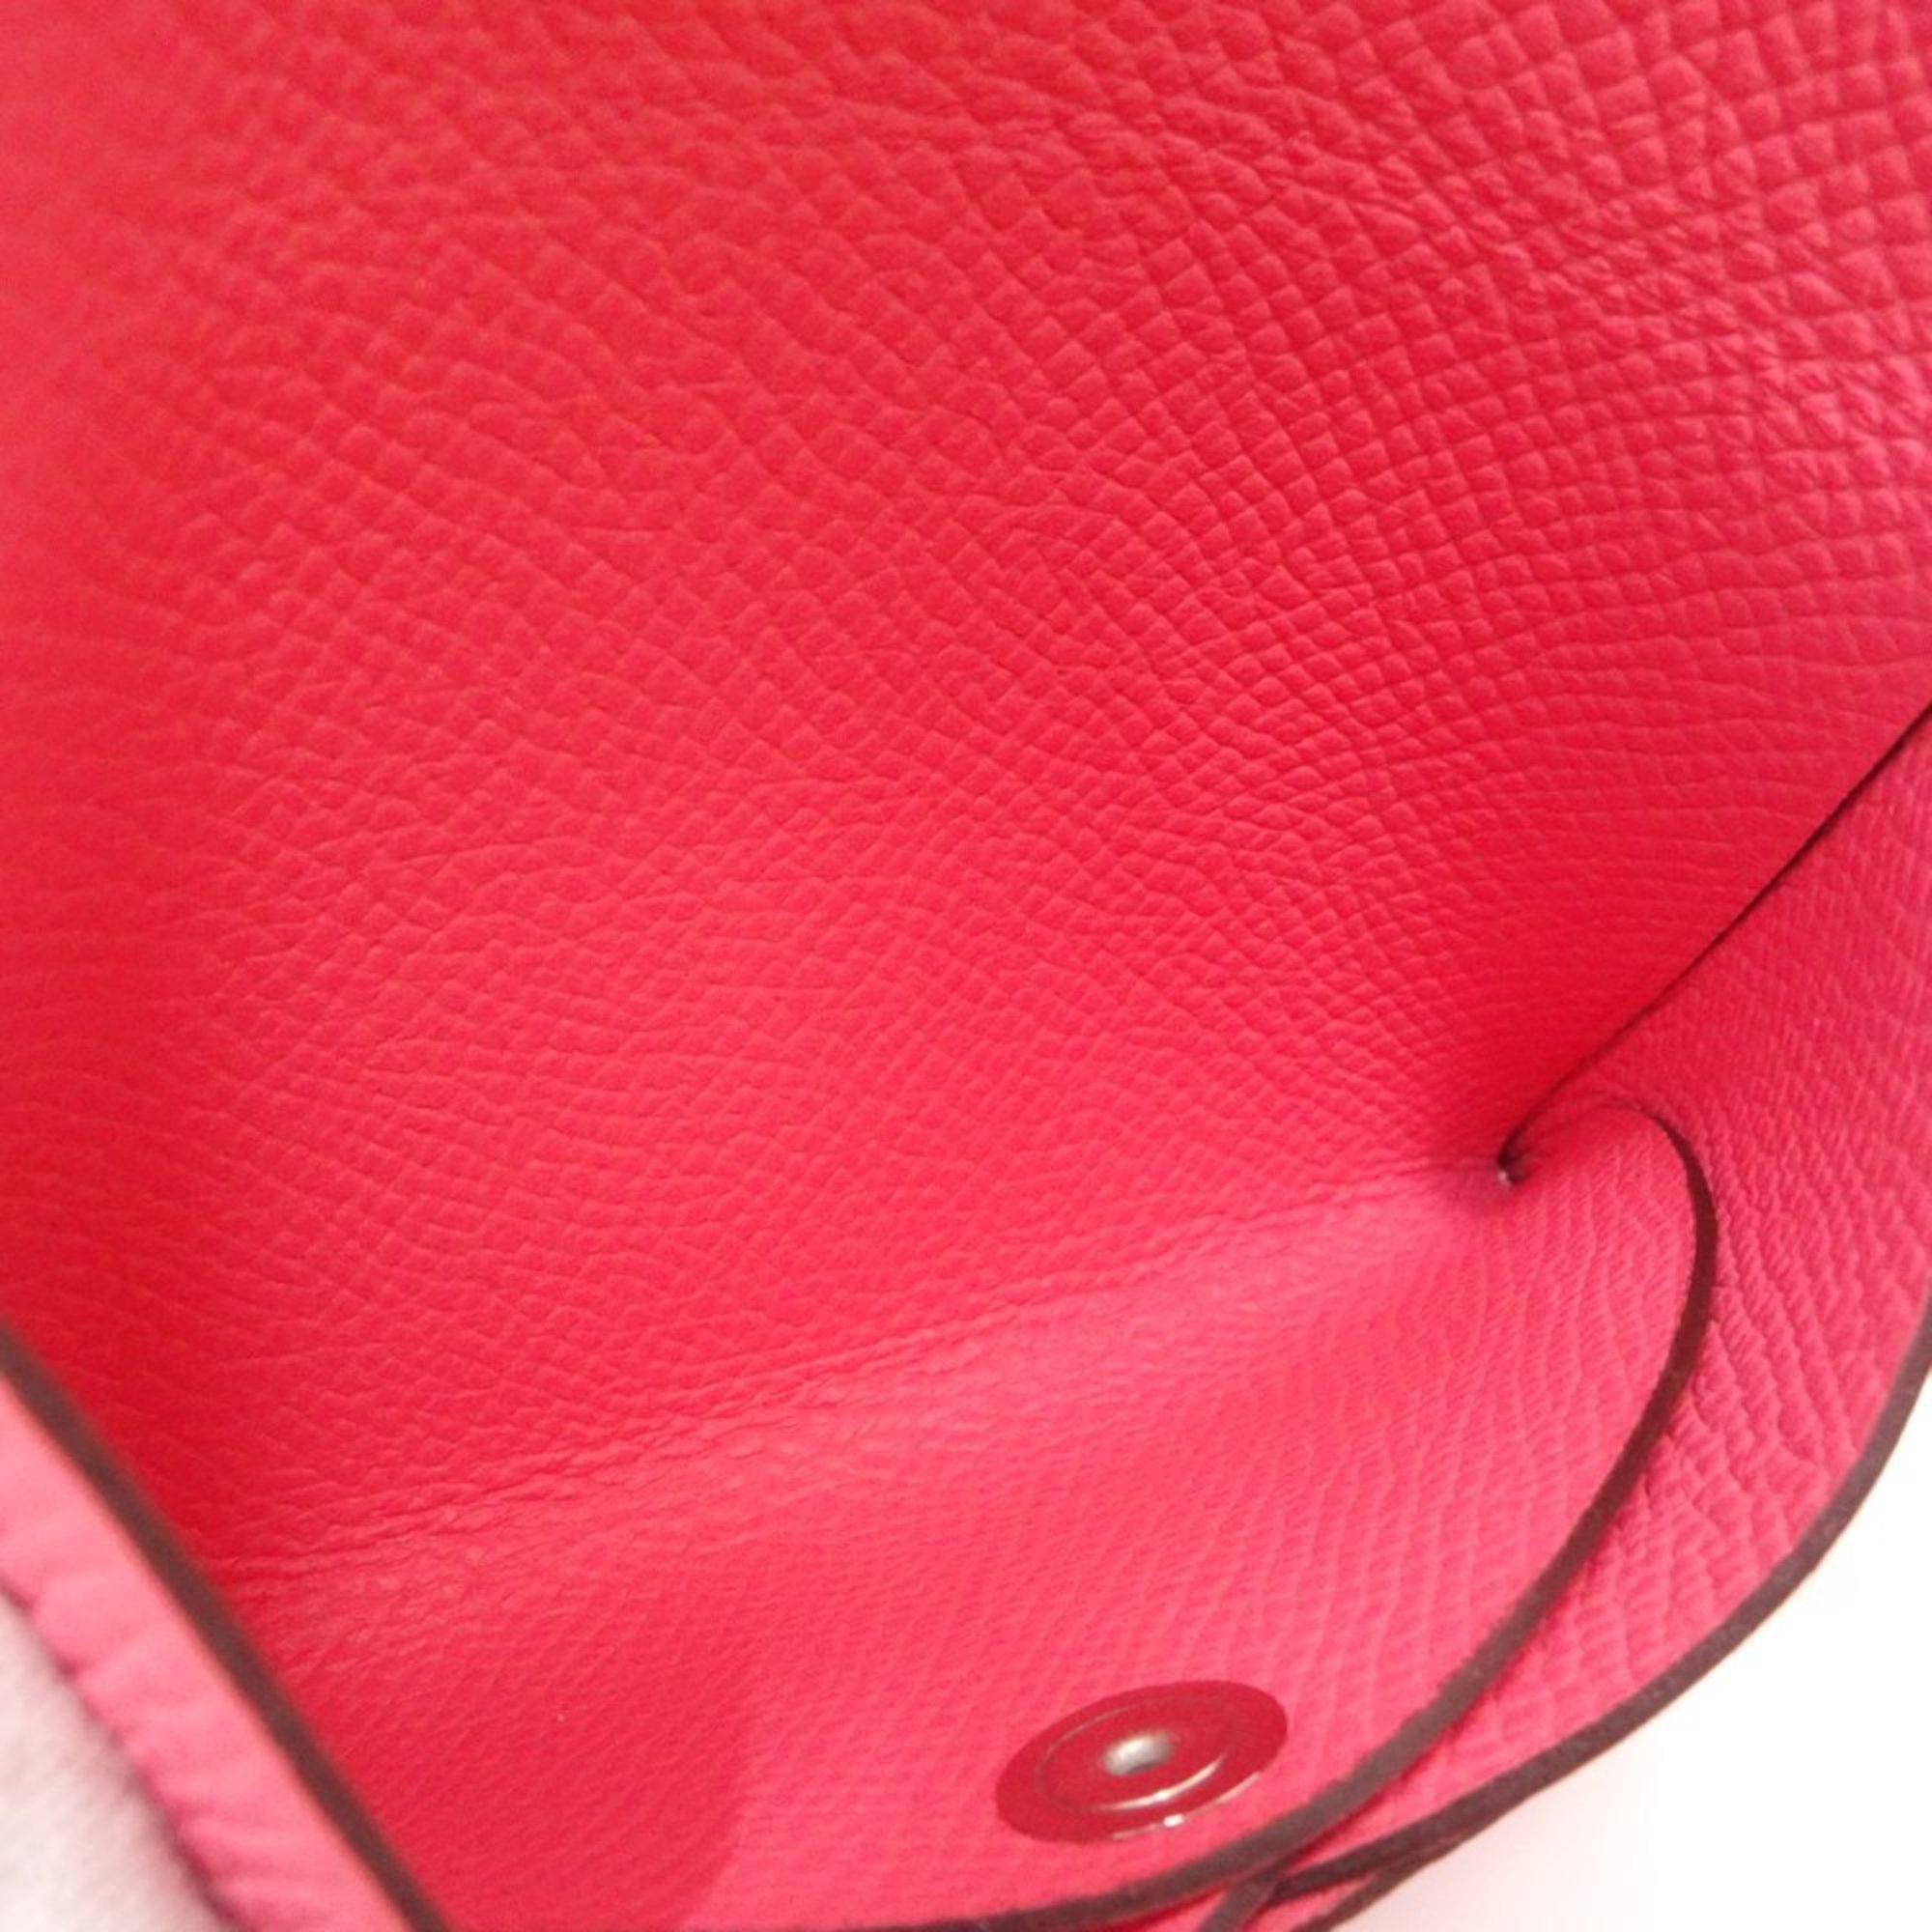 Hermes Calvi Duo Coin Case Leather Pink 083815